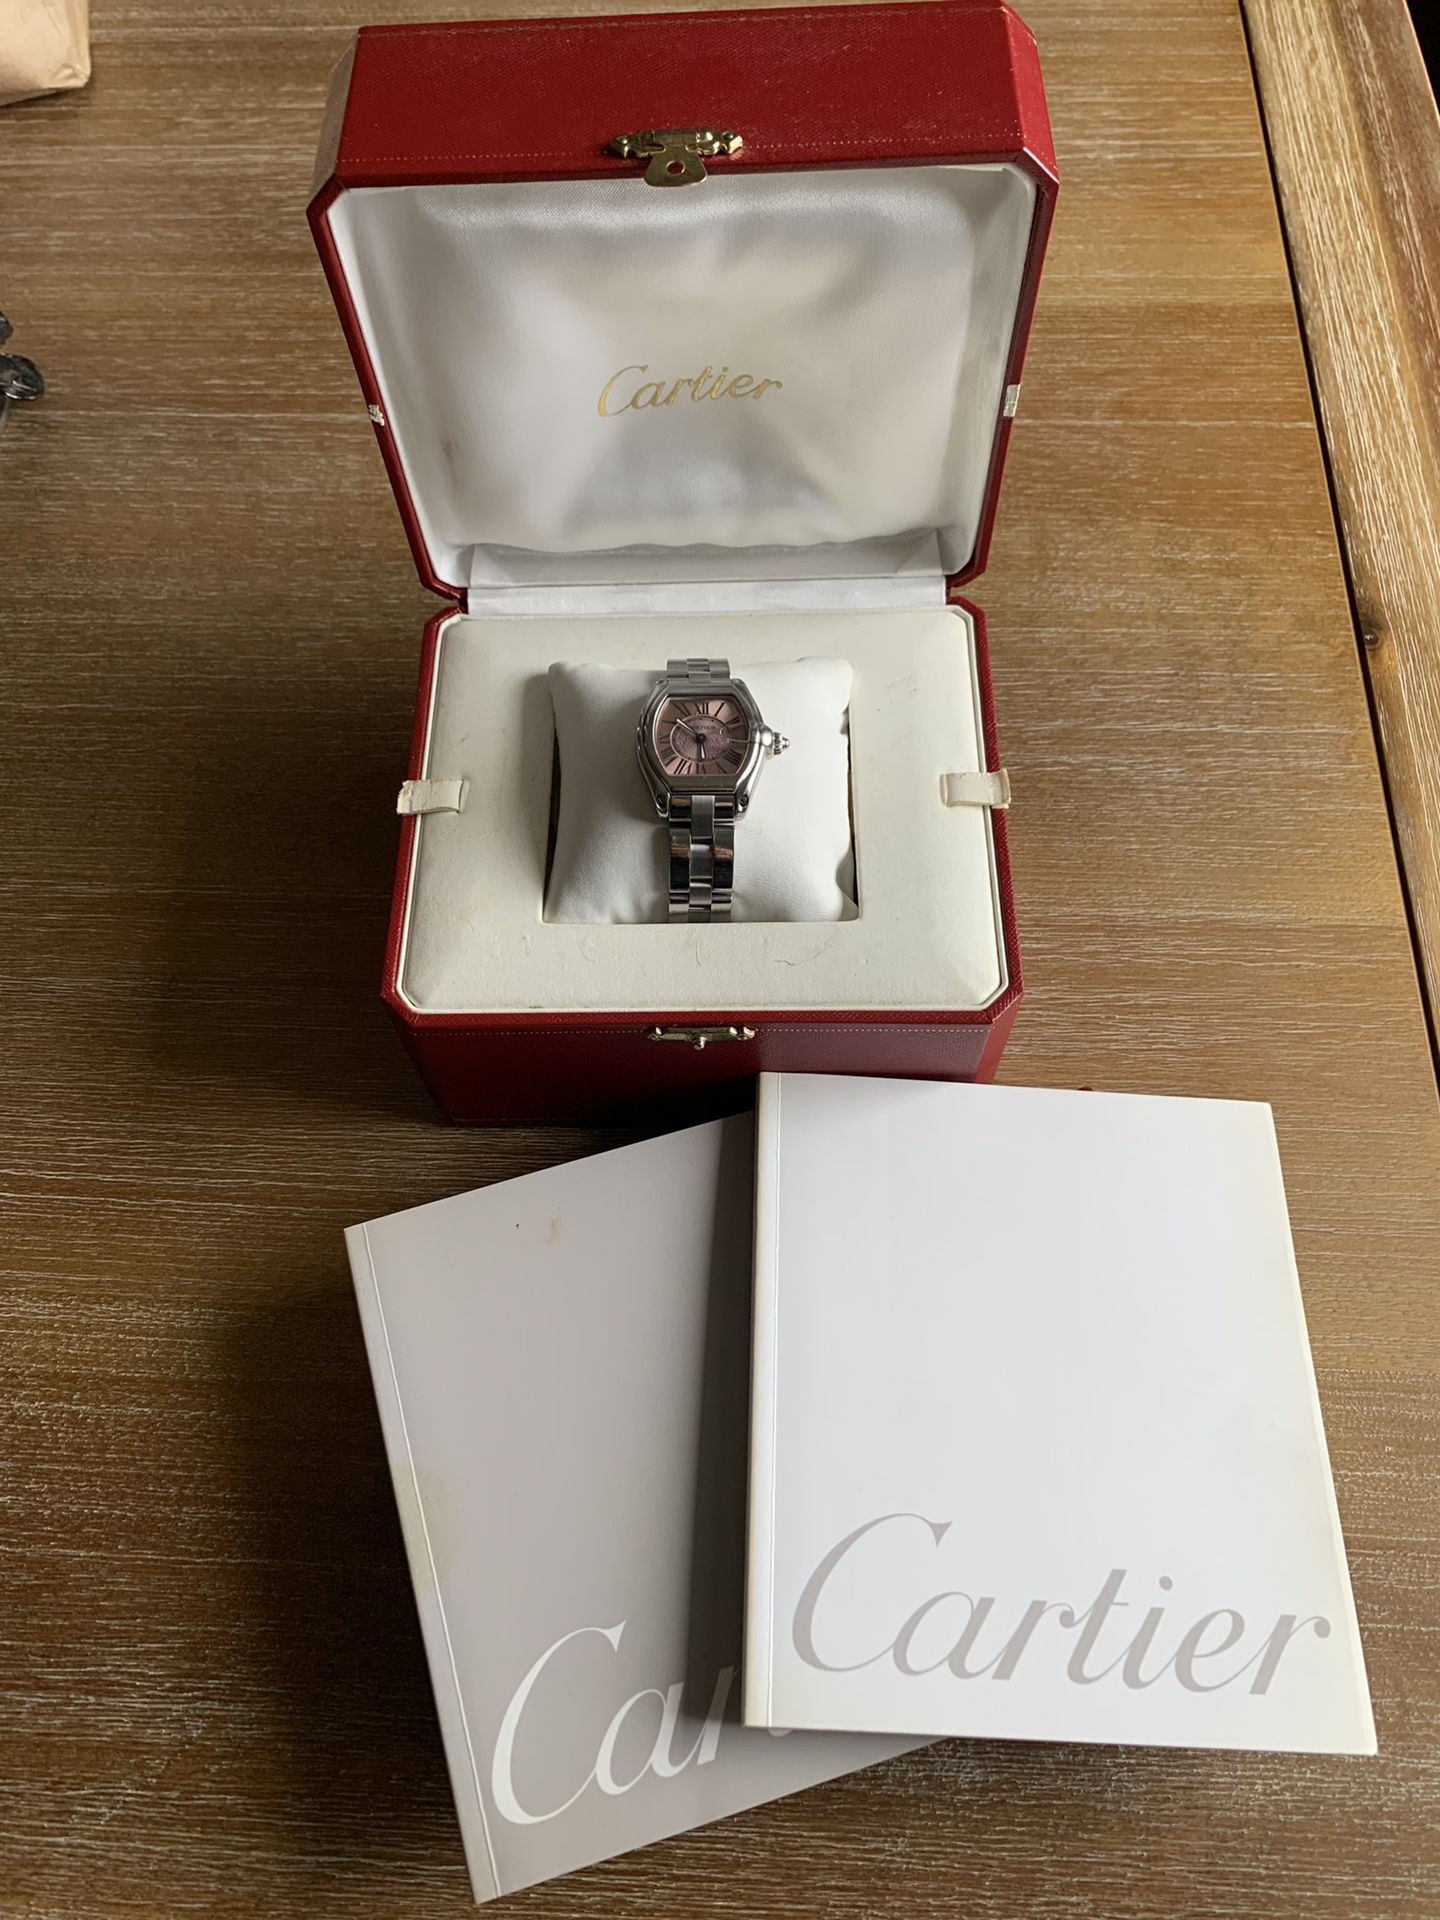 Cartier ladies limited edition in pink